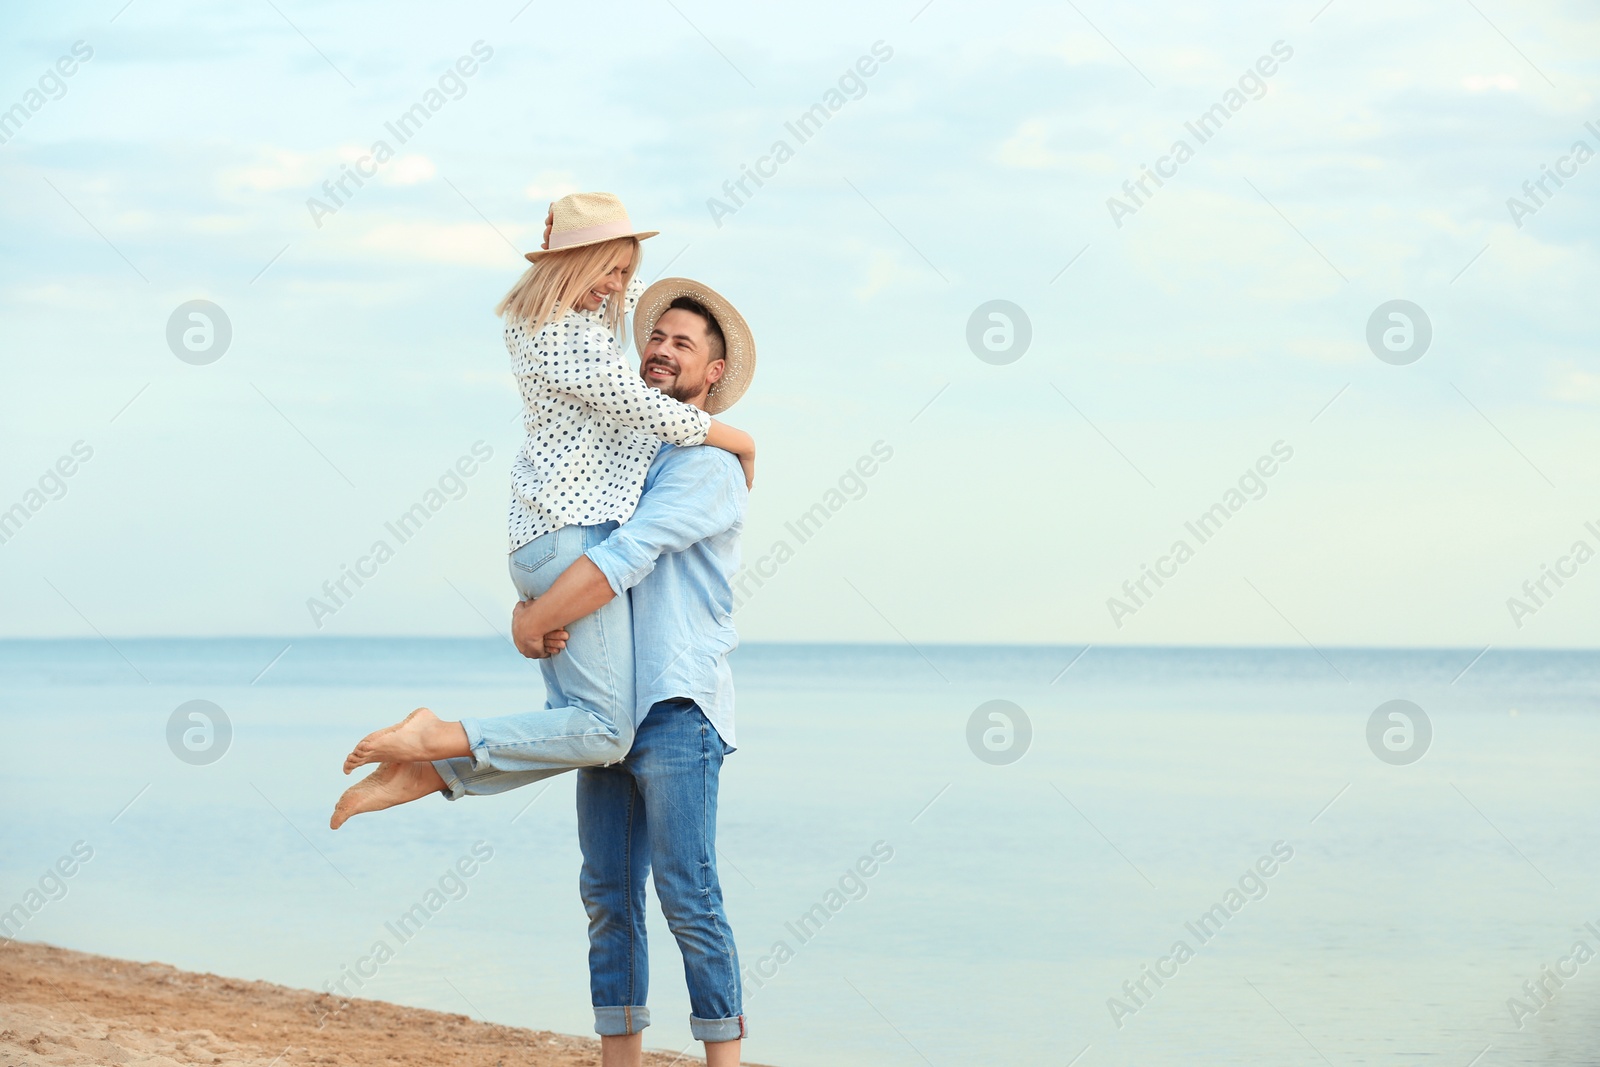 Photo of Happy romantic couple spending time together on beach, space for text